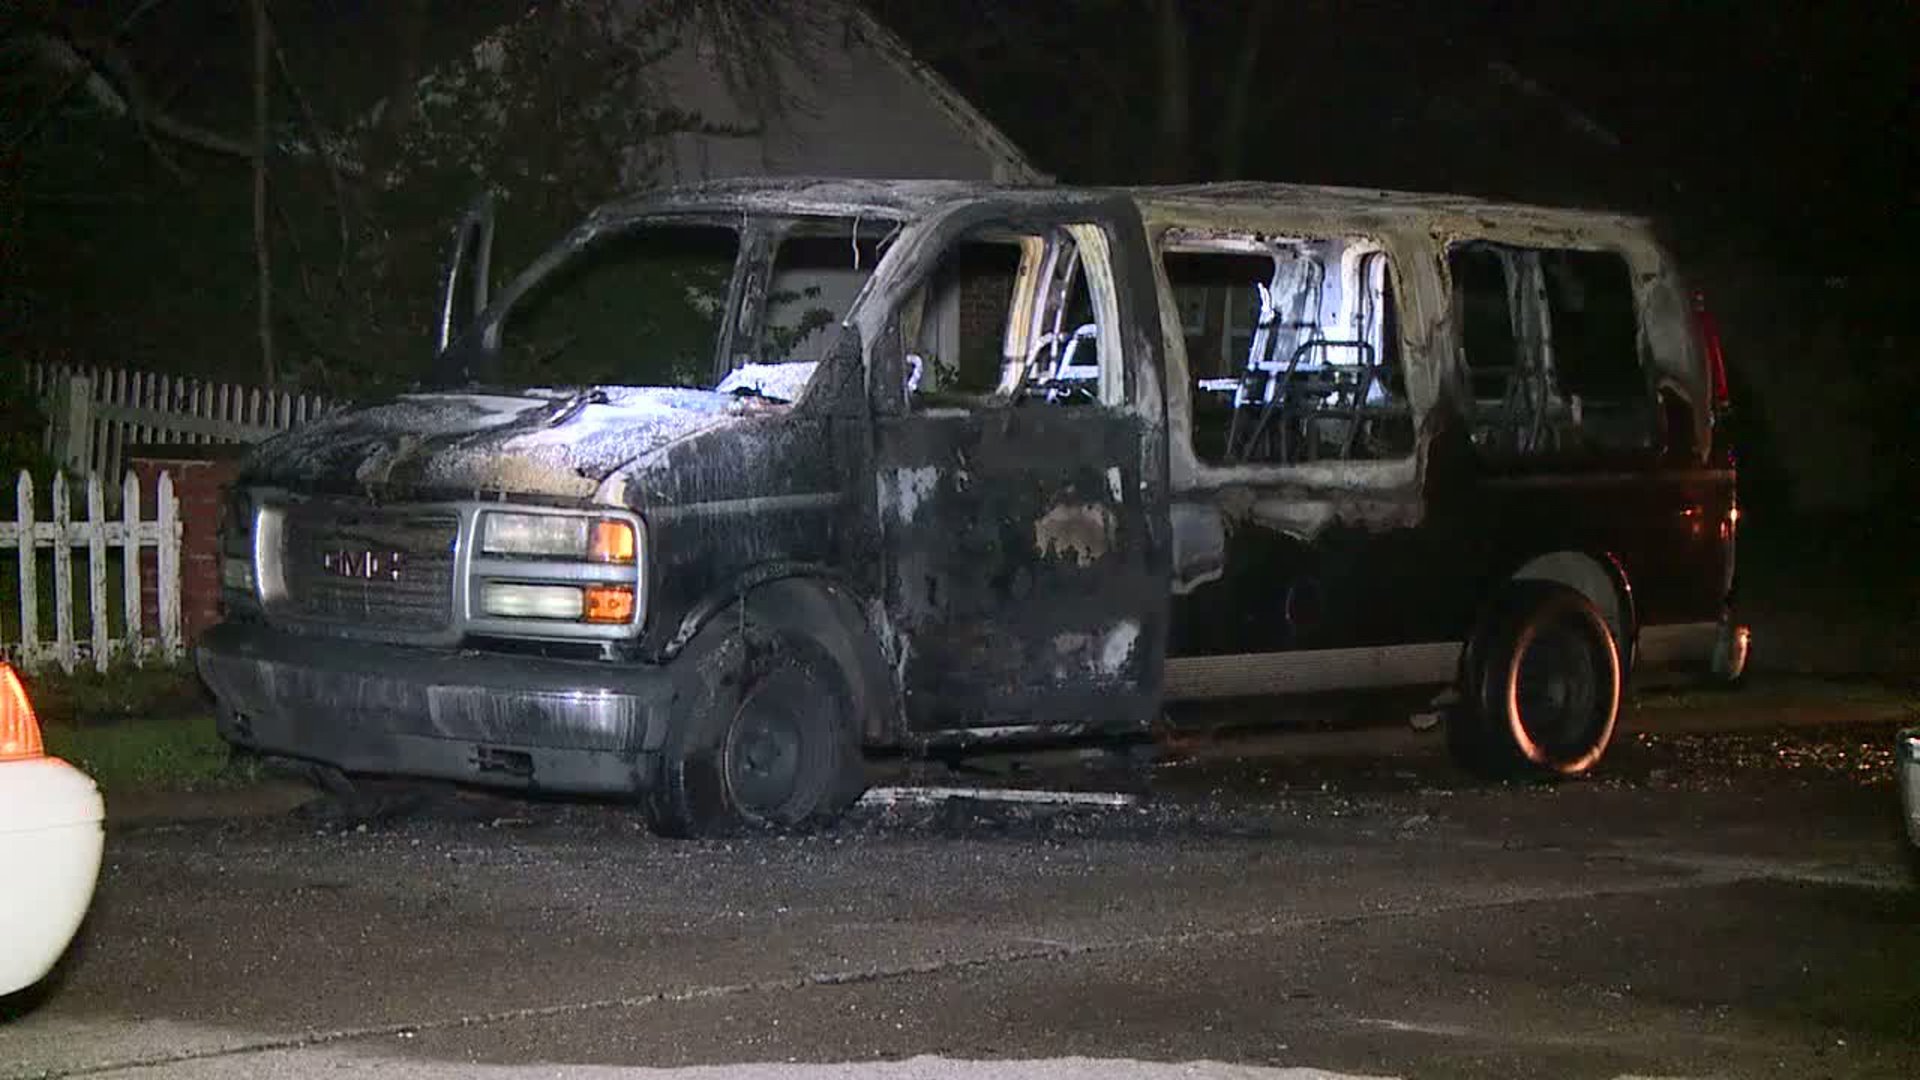 Police: Man in critical condition after being found inside burning ...